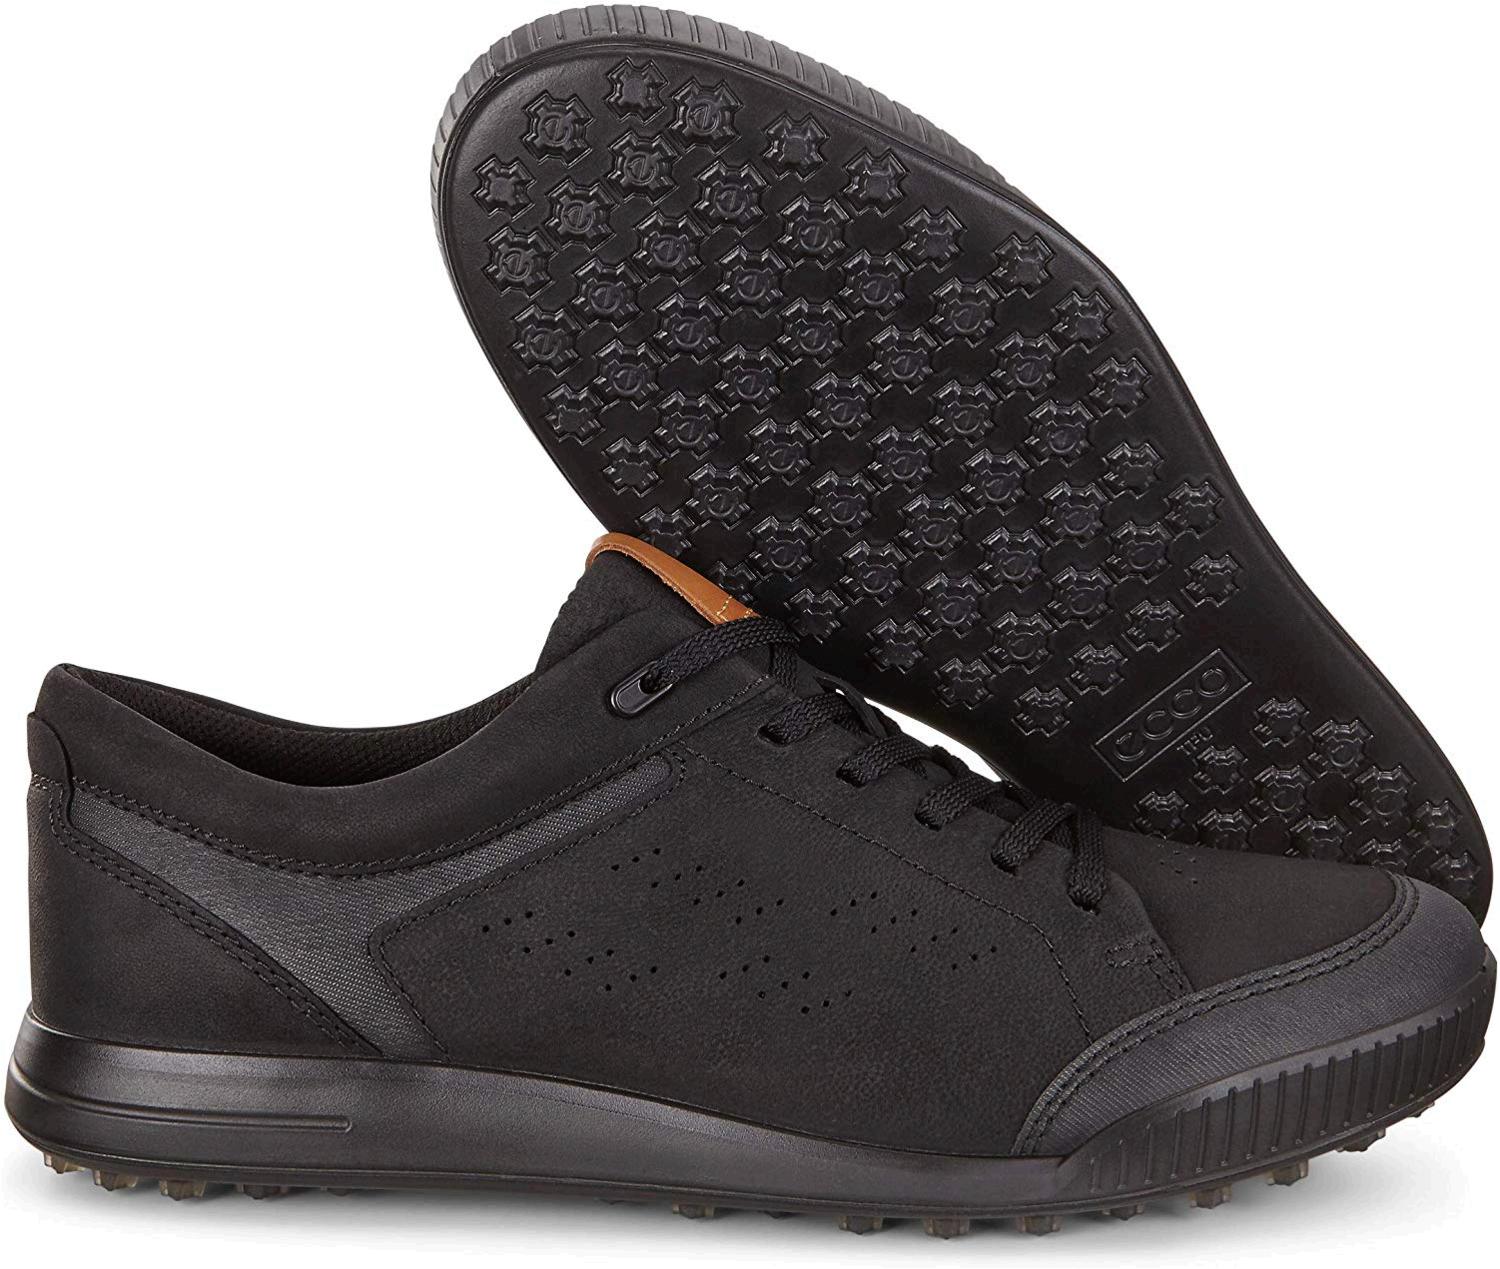 Ecco Golf Shoes For Men Wide